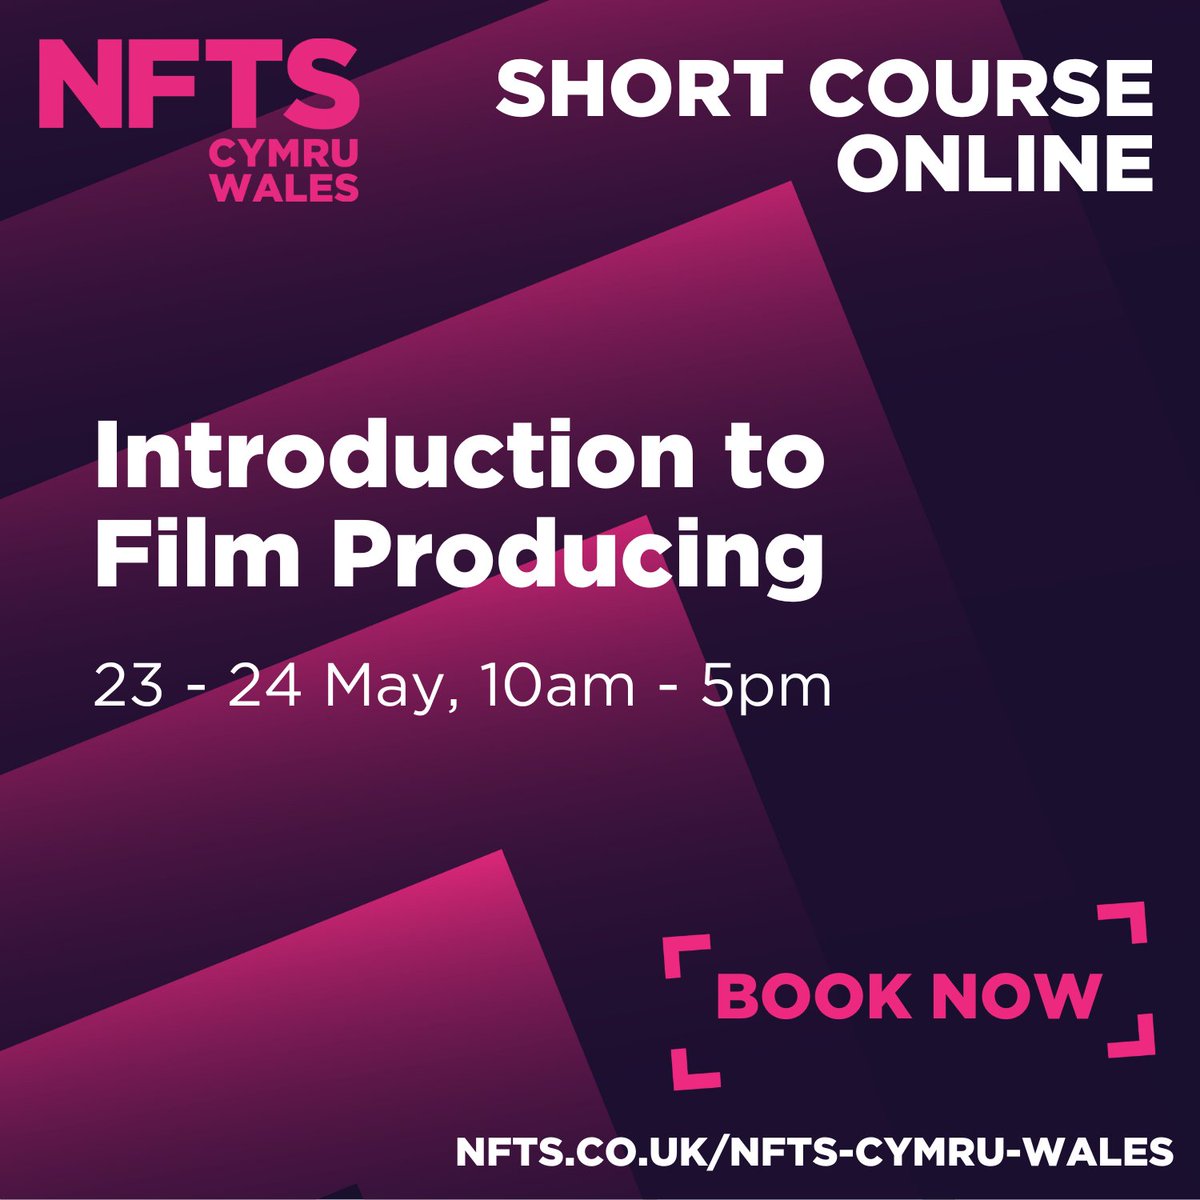 Curious about film producing? 📽️ Book now for our 'Introduction to Film Producing' online short course on 23 - 24 May, 10am - 5pm Based in Wales? Check out one of our @cymrugreadigol bursaries to help fund your course. nfts.co.uk/introduction-f… #makeit #film #tv #producing